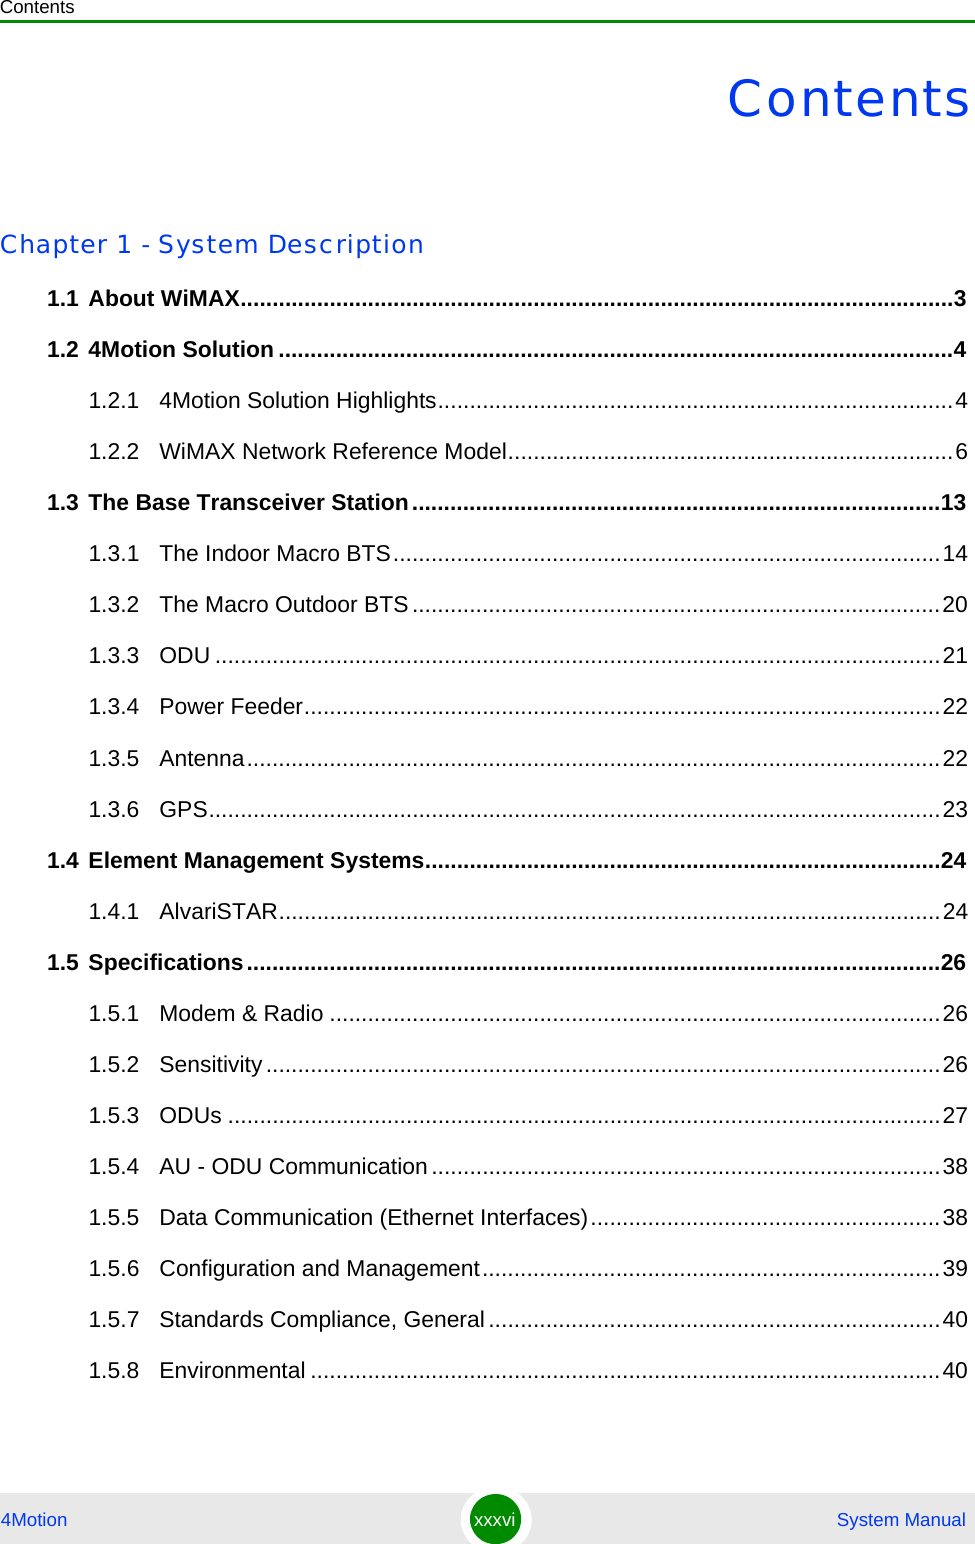 Contents4Motion xxxvi  System ManualContentsChapter 1 - System Description1.1 About WiMAX................................................................................................................31.2 4Motion Solution ..........................................................................................................41.2.1 4Motion Solution Highlights.................................................................................41.2.2 WiMAX Network Reference Model......................................................................61.3 The Base Transceiver Station...................................................................................131.3.1 The Indoor Macro BTS......................................................................................141.3.2 The Macro Outdoor BTS...................................................................................201.3.3 ODU ..................................................................................................................211.3.4 Power Feeder....................................................................................................221.3.5 Antenna.............................................................................................................221.3.6 GPS...................................................................................................................231.4 Element Management Systems.................................................................................241.4.1 AlvariSTAR........................................................................................................241.5 Specifications.............................................................................................................261.5.1 Modem &amp; Radio ................................................................................................261.5.2 Sensitivity..........................................................................................................261.5.3 ODUs ................................................................................................................271.5.4 AU - ODU Communication................................................................................381.5.5 Data Communication (Ethernet Interfaces).......................................................381.5.6 Configuration and Management........................................................................391.5.7 Standards Compliance, General.......................................................................401.5.8 Environmental ...................................................................................................40